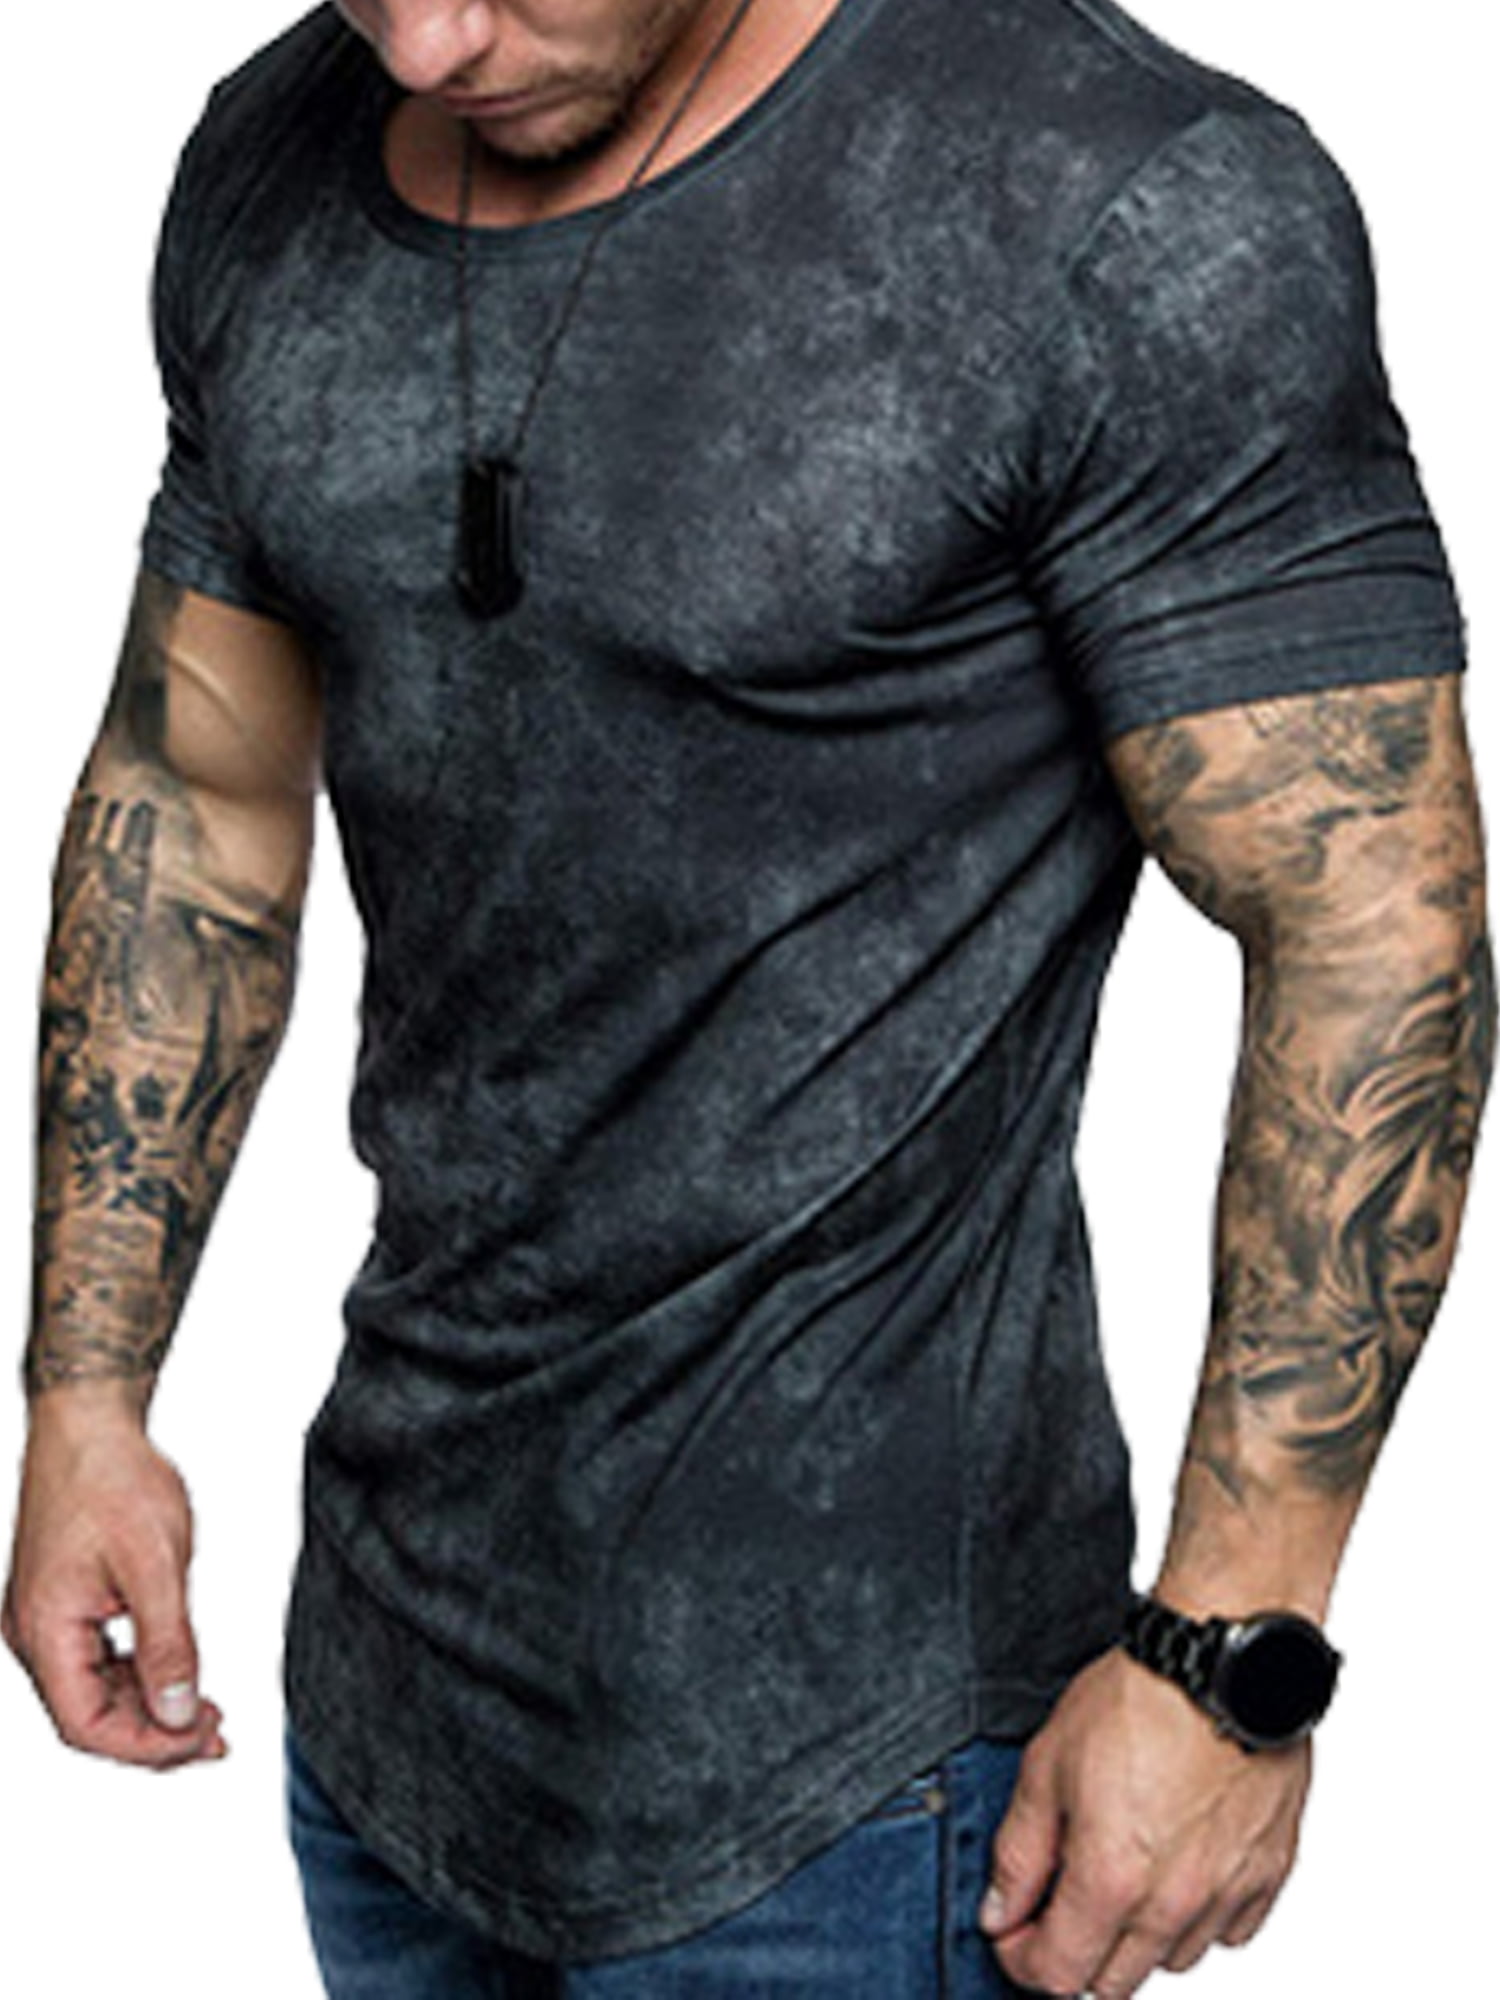 Men's blouse t-shirt slim fit tops muscle tee short sleeve casual t shirts solid